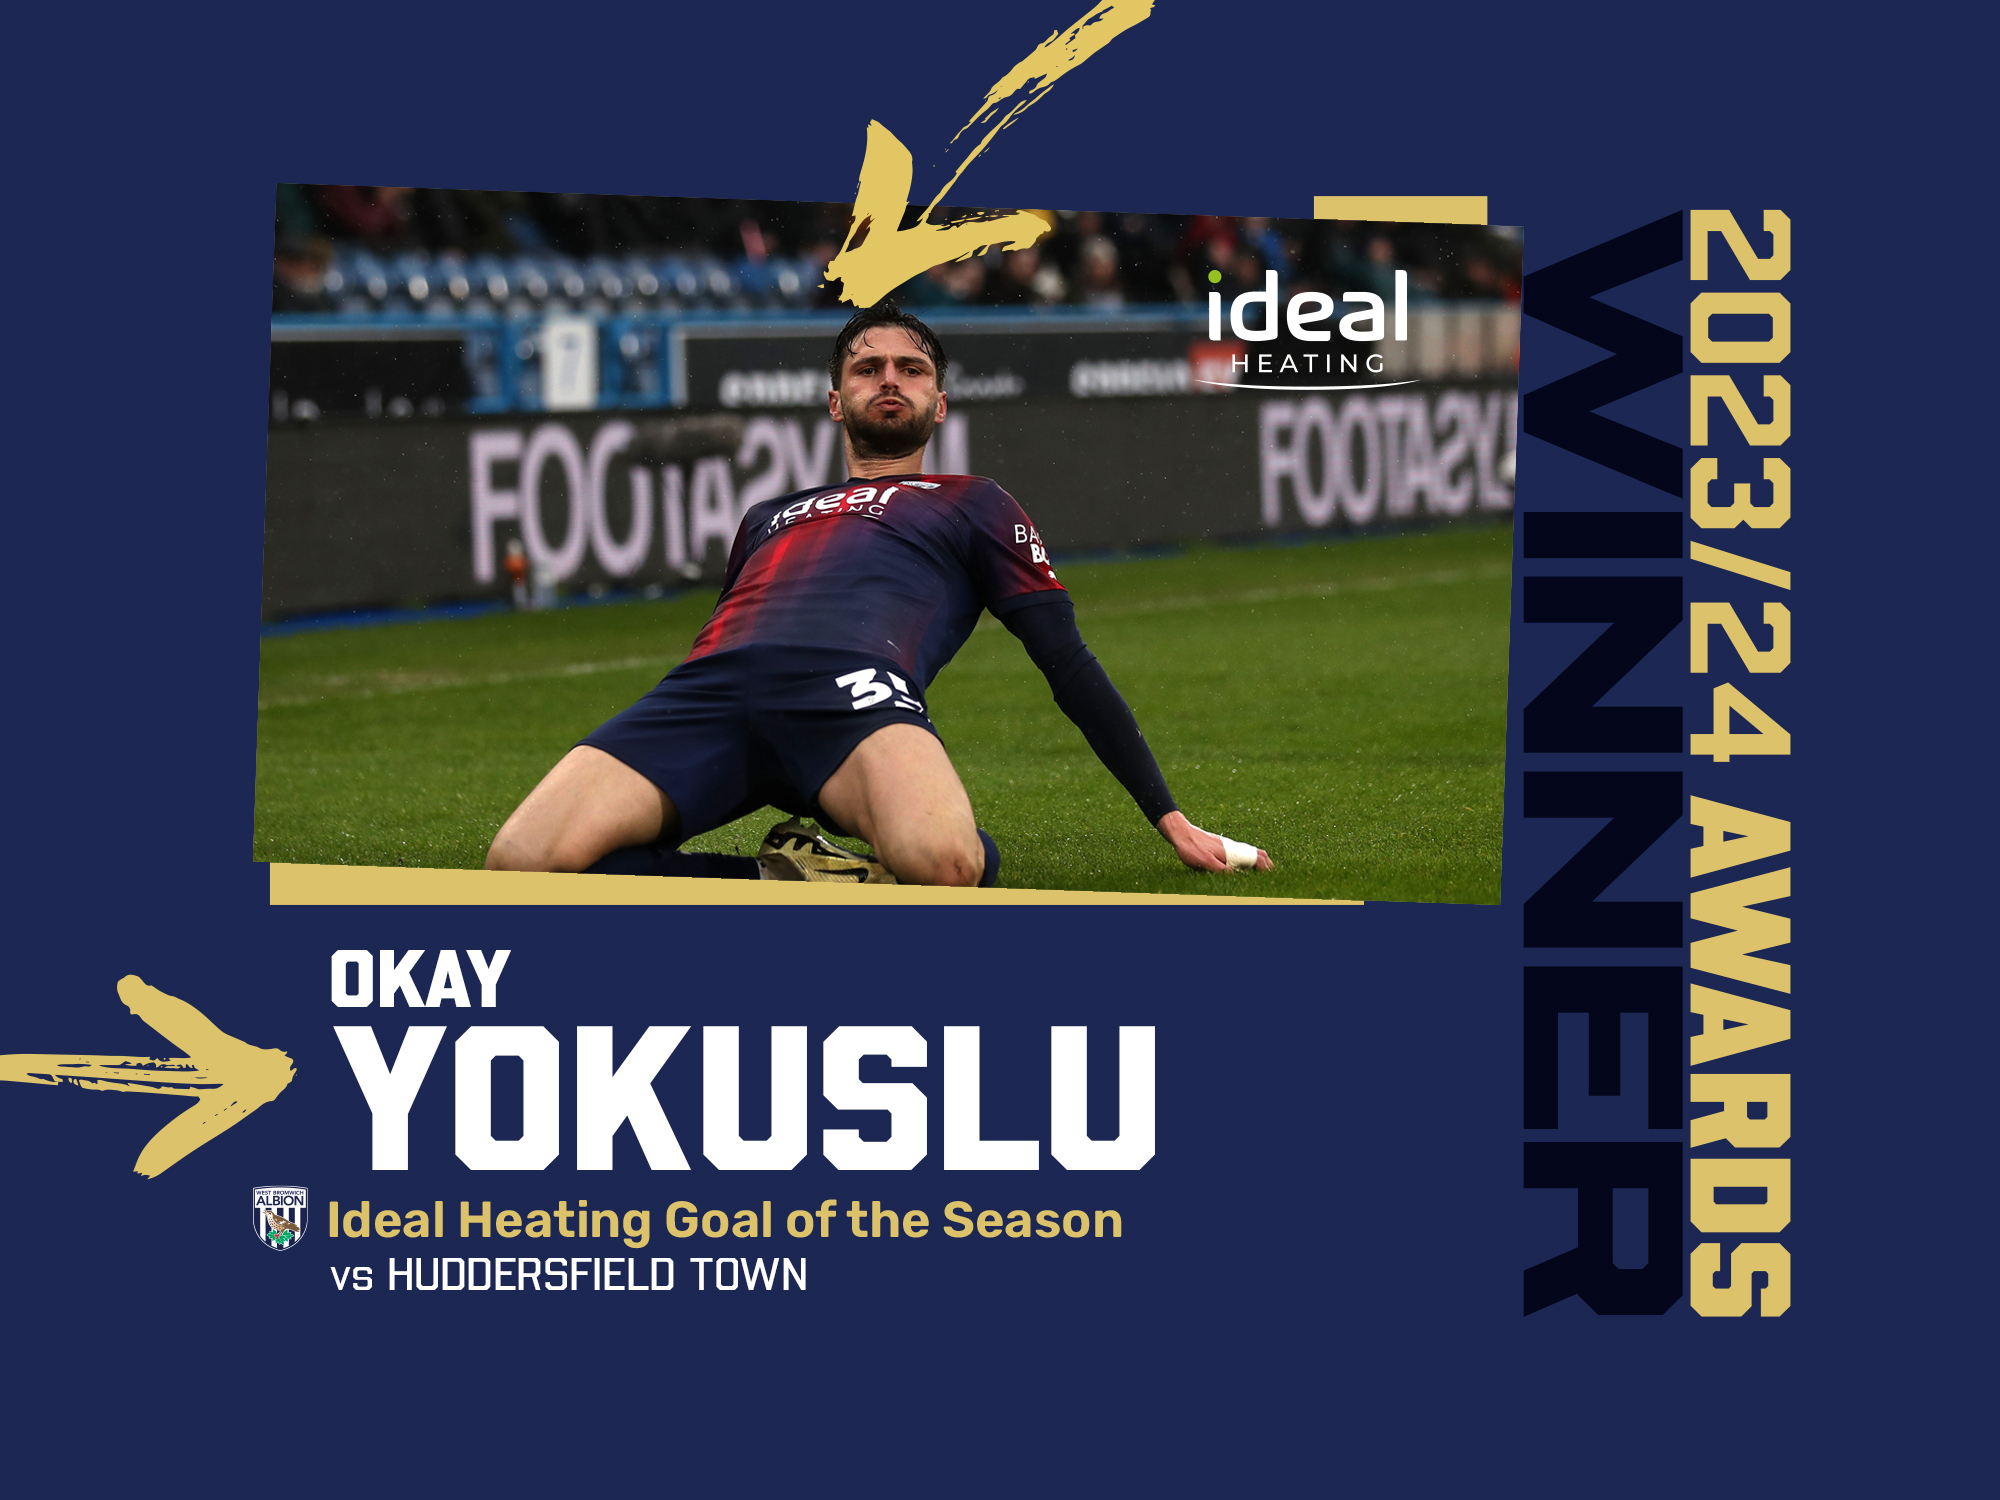 Okay Yokuslu's Goal of the Season graphic with an image of him celebrating against Huddersfield Town in the navy blue and red kit on